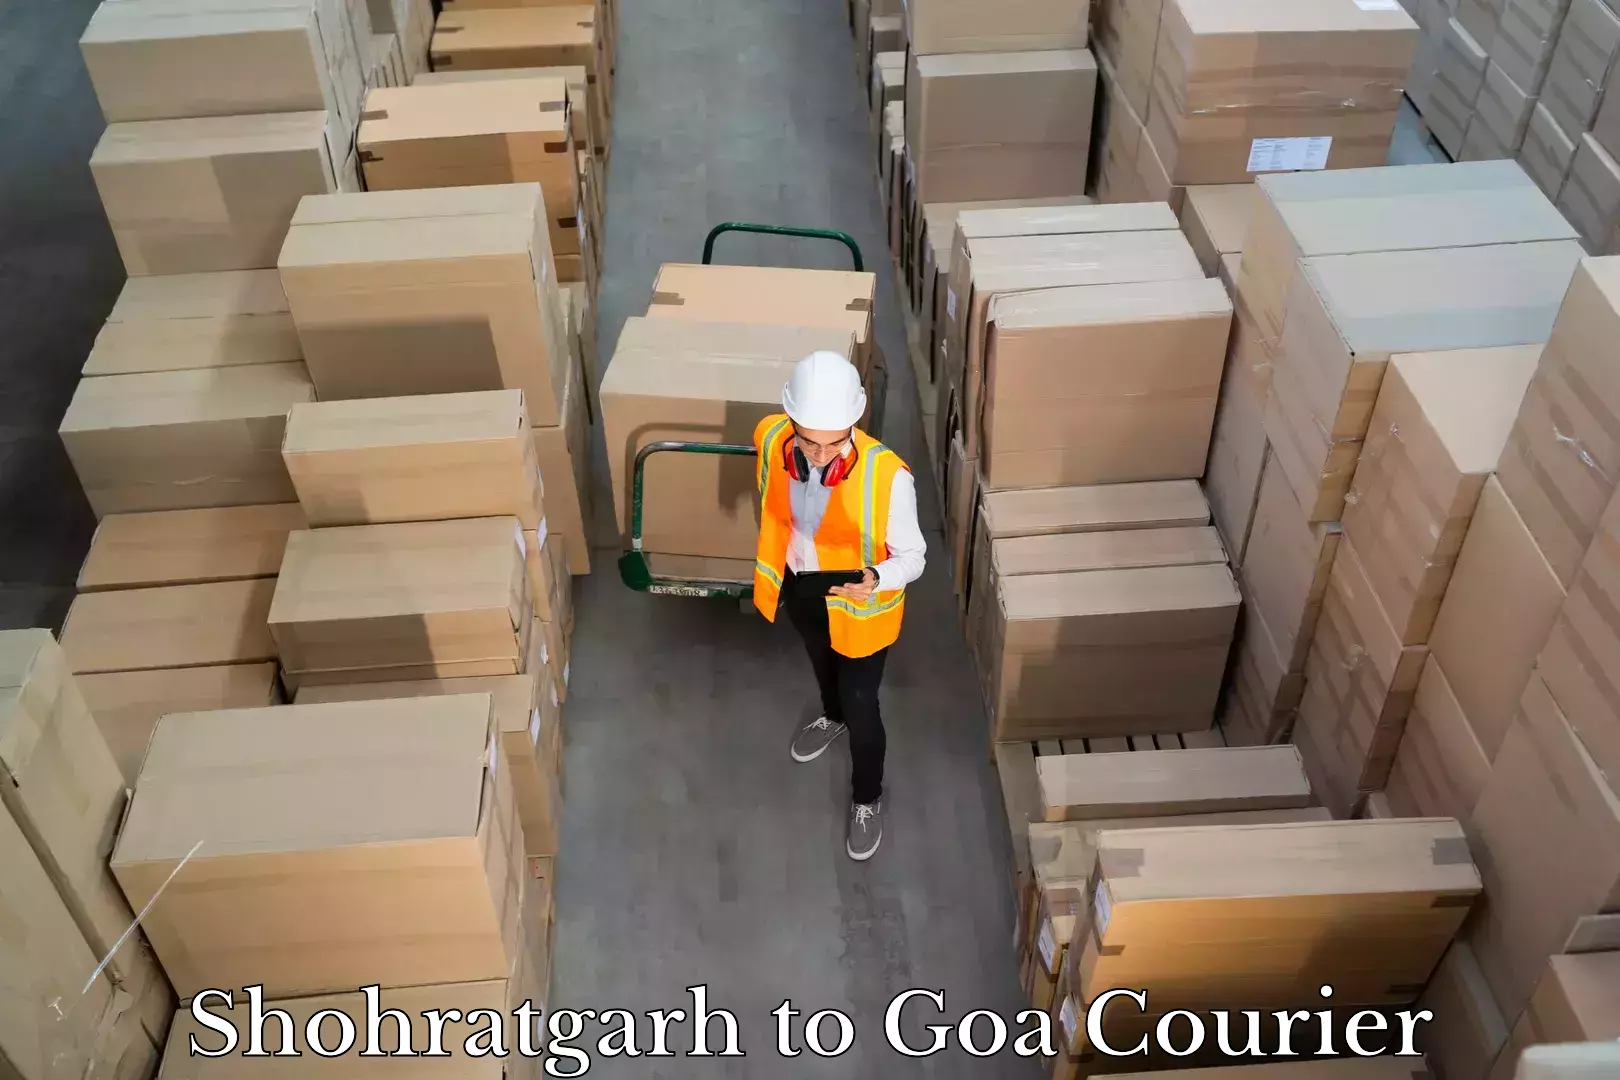 Luggage delivery system Shohratgarh to South Goa